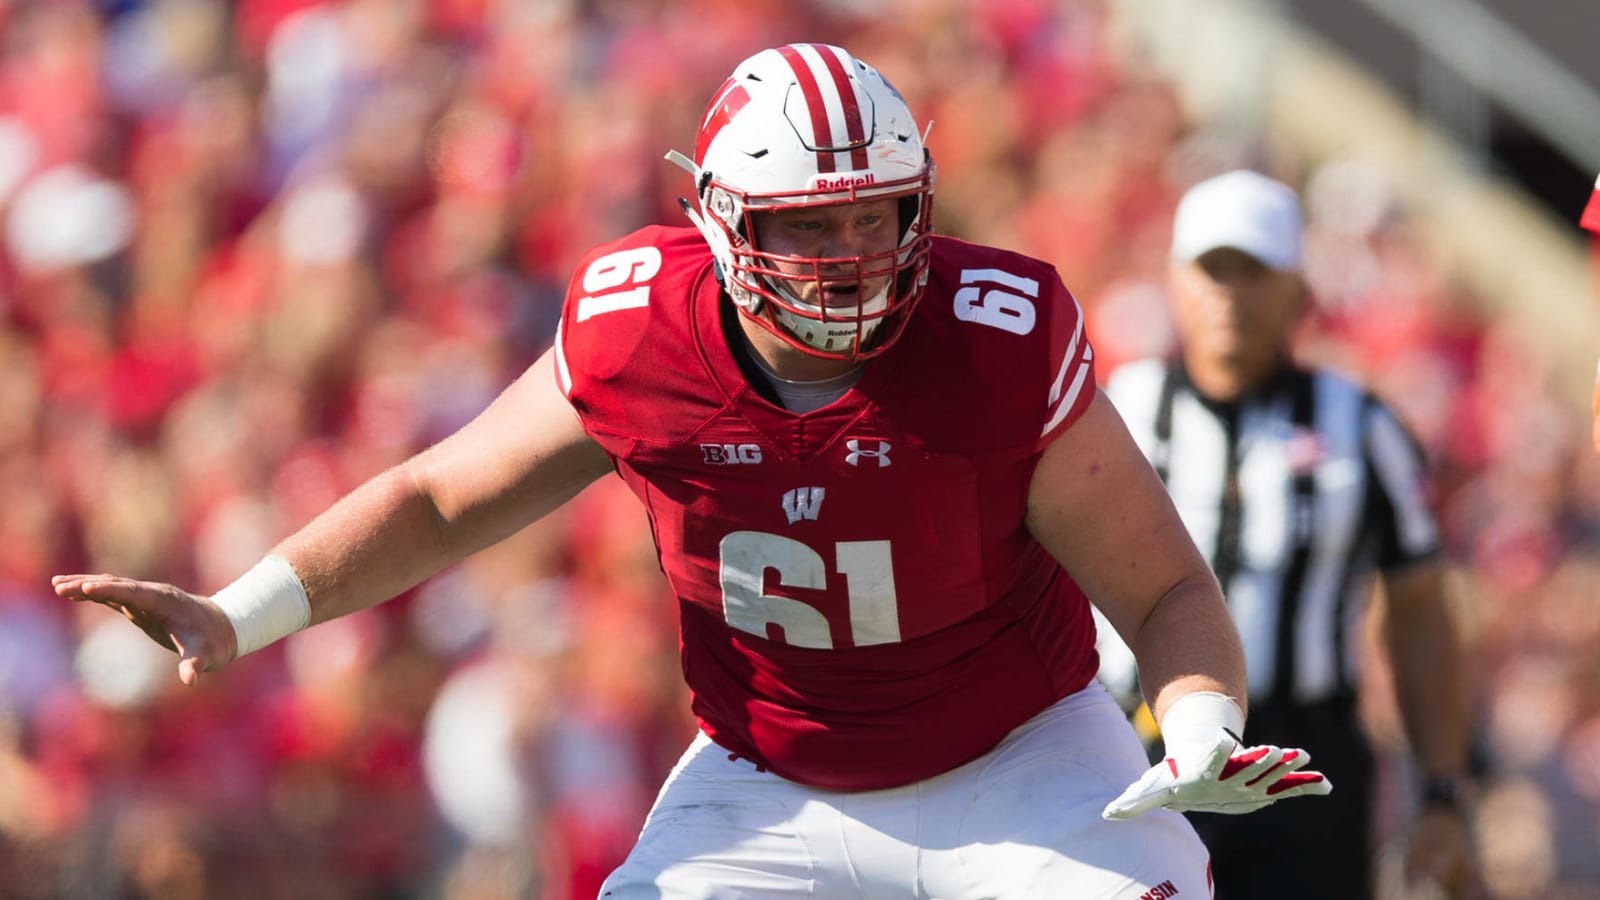 Wisconsin center Tyler Biadasz embraces his 'country strength'